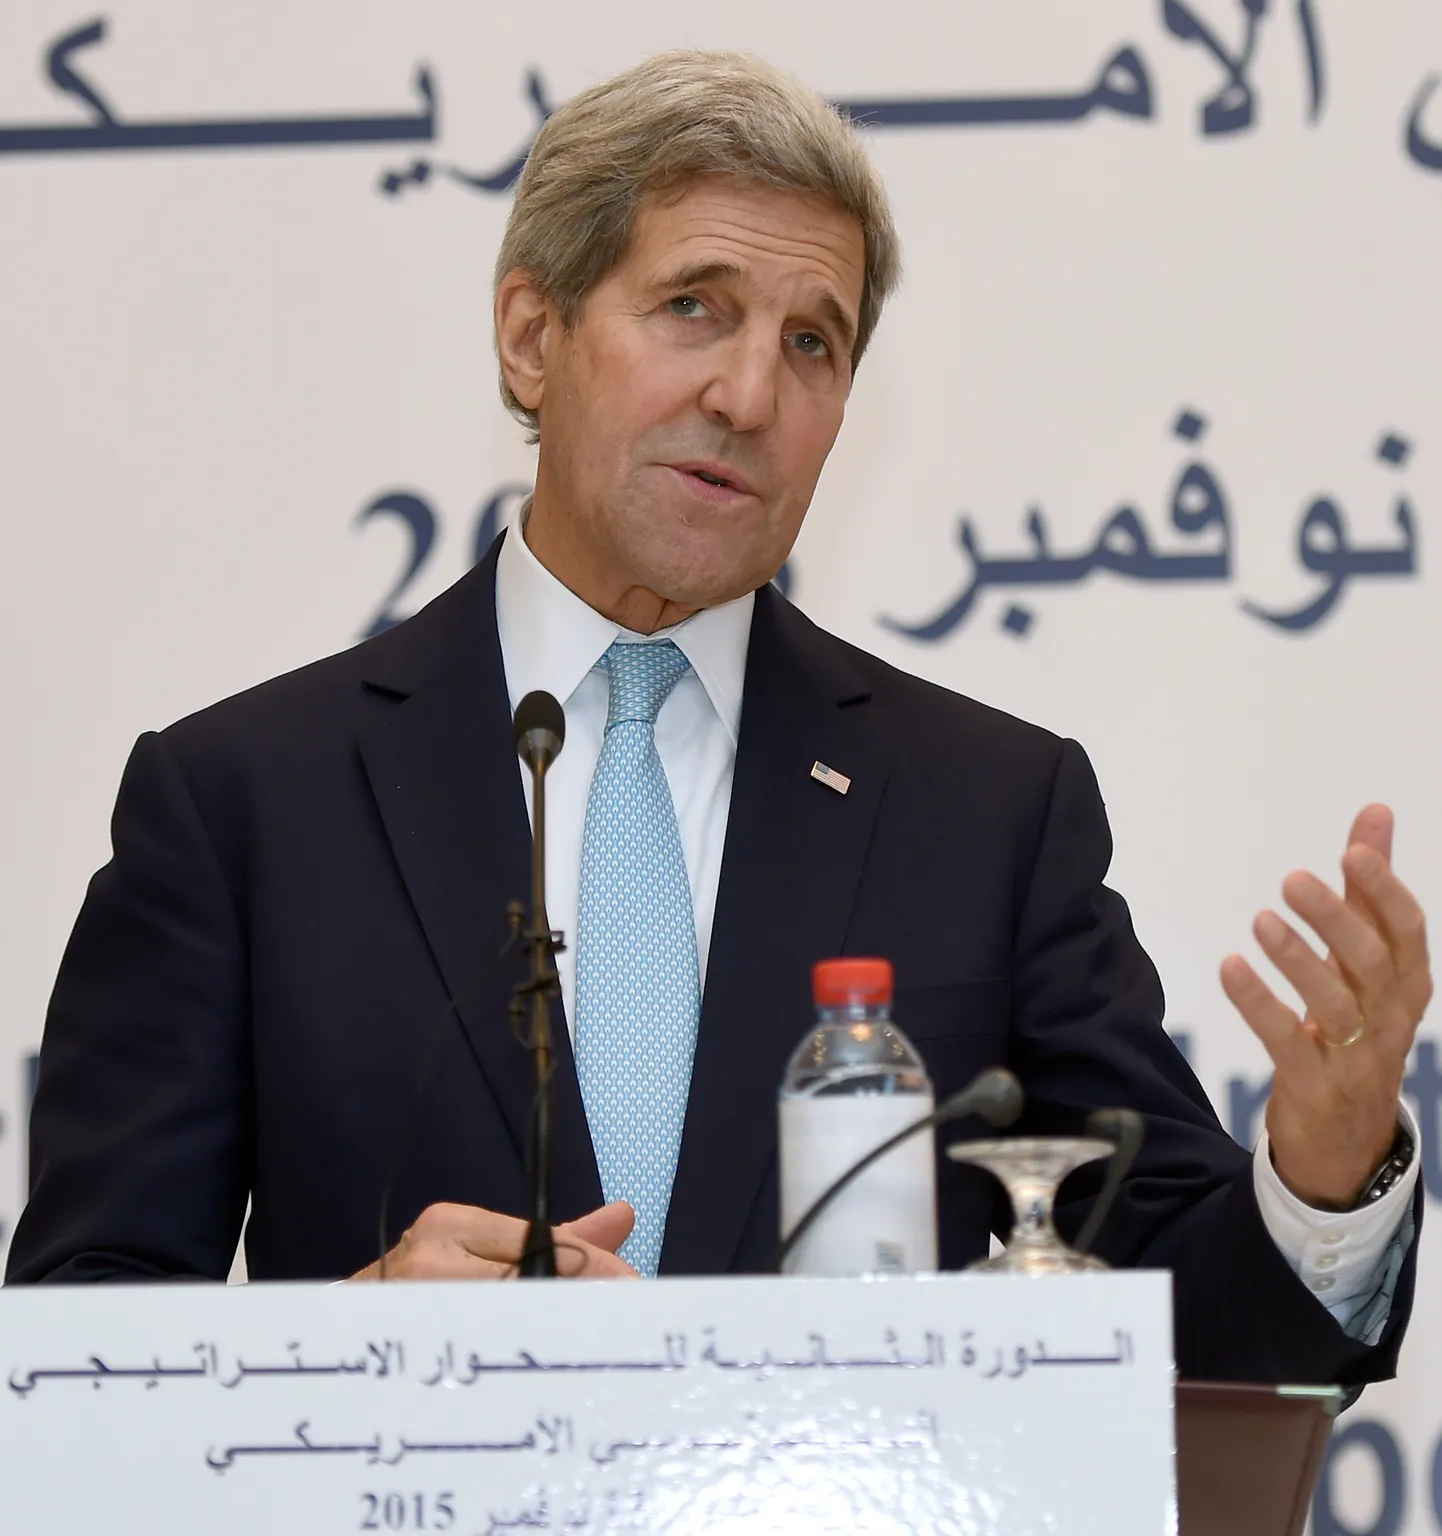 US Secretary of State John Kerry speaks during a press conference with his Tunisian counterpart Taieb Baccouche, on November 13, 2015 at the foreign ministry in Tunis. Kerry arrived in Tunis to take part in a strategic dialogue aimed at bolstering political and economic ties with the North African nation. AFP PHOTO / FETHI BELAID